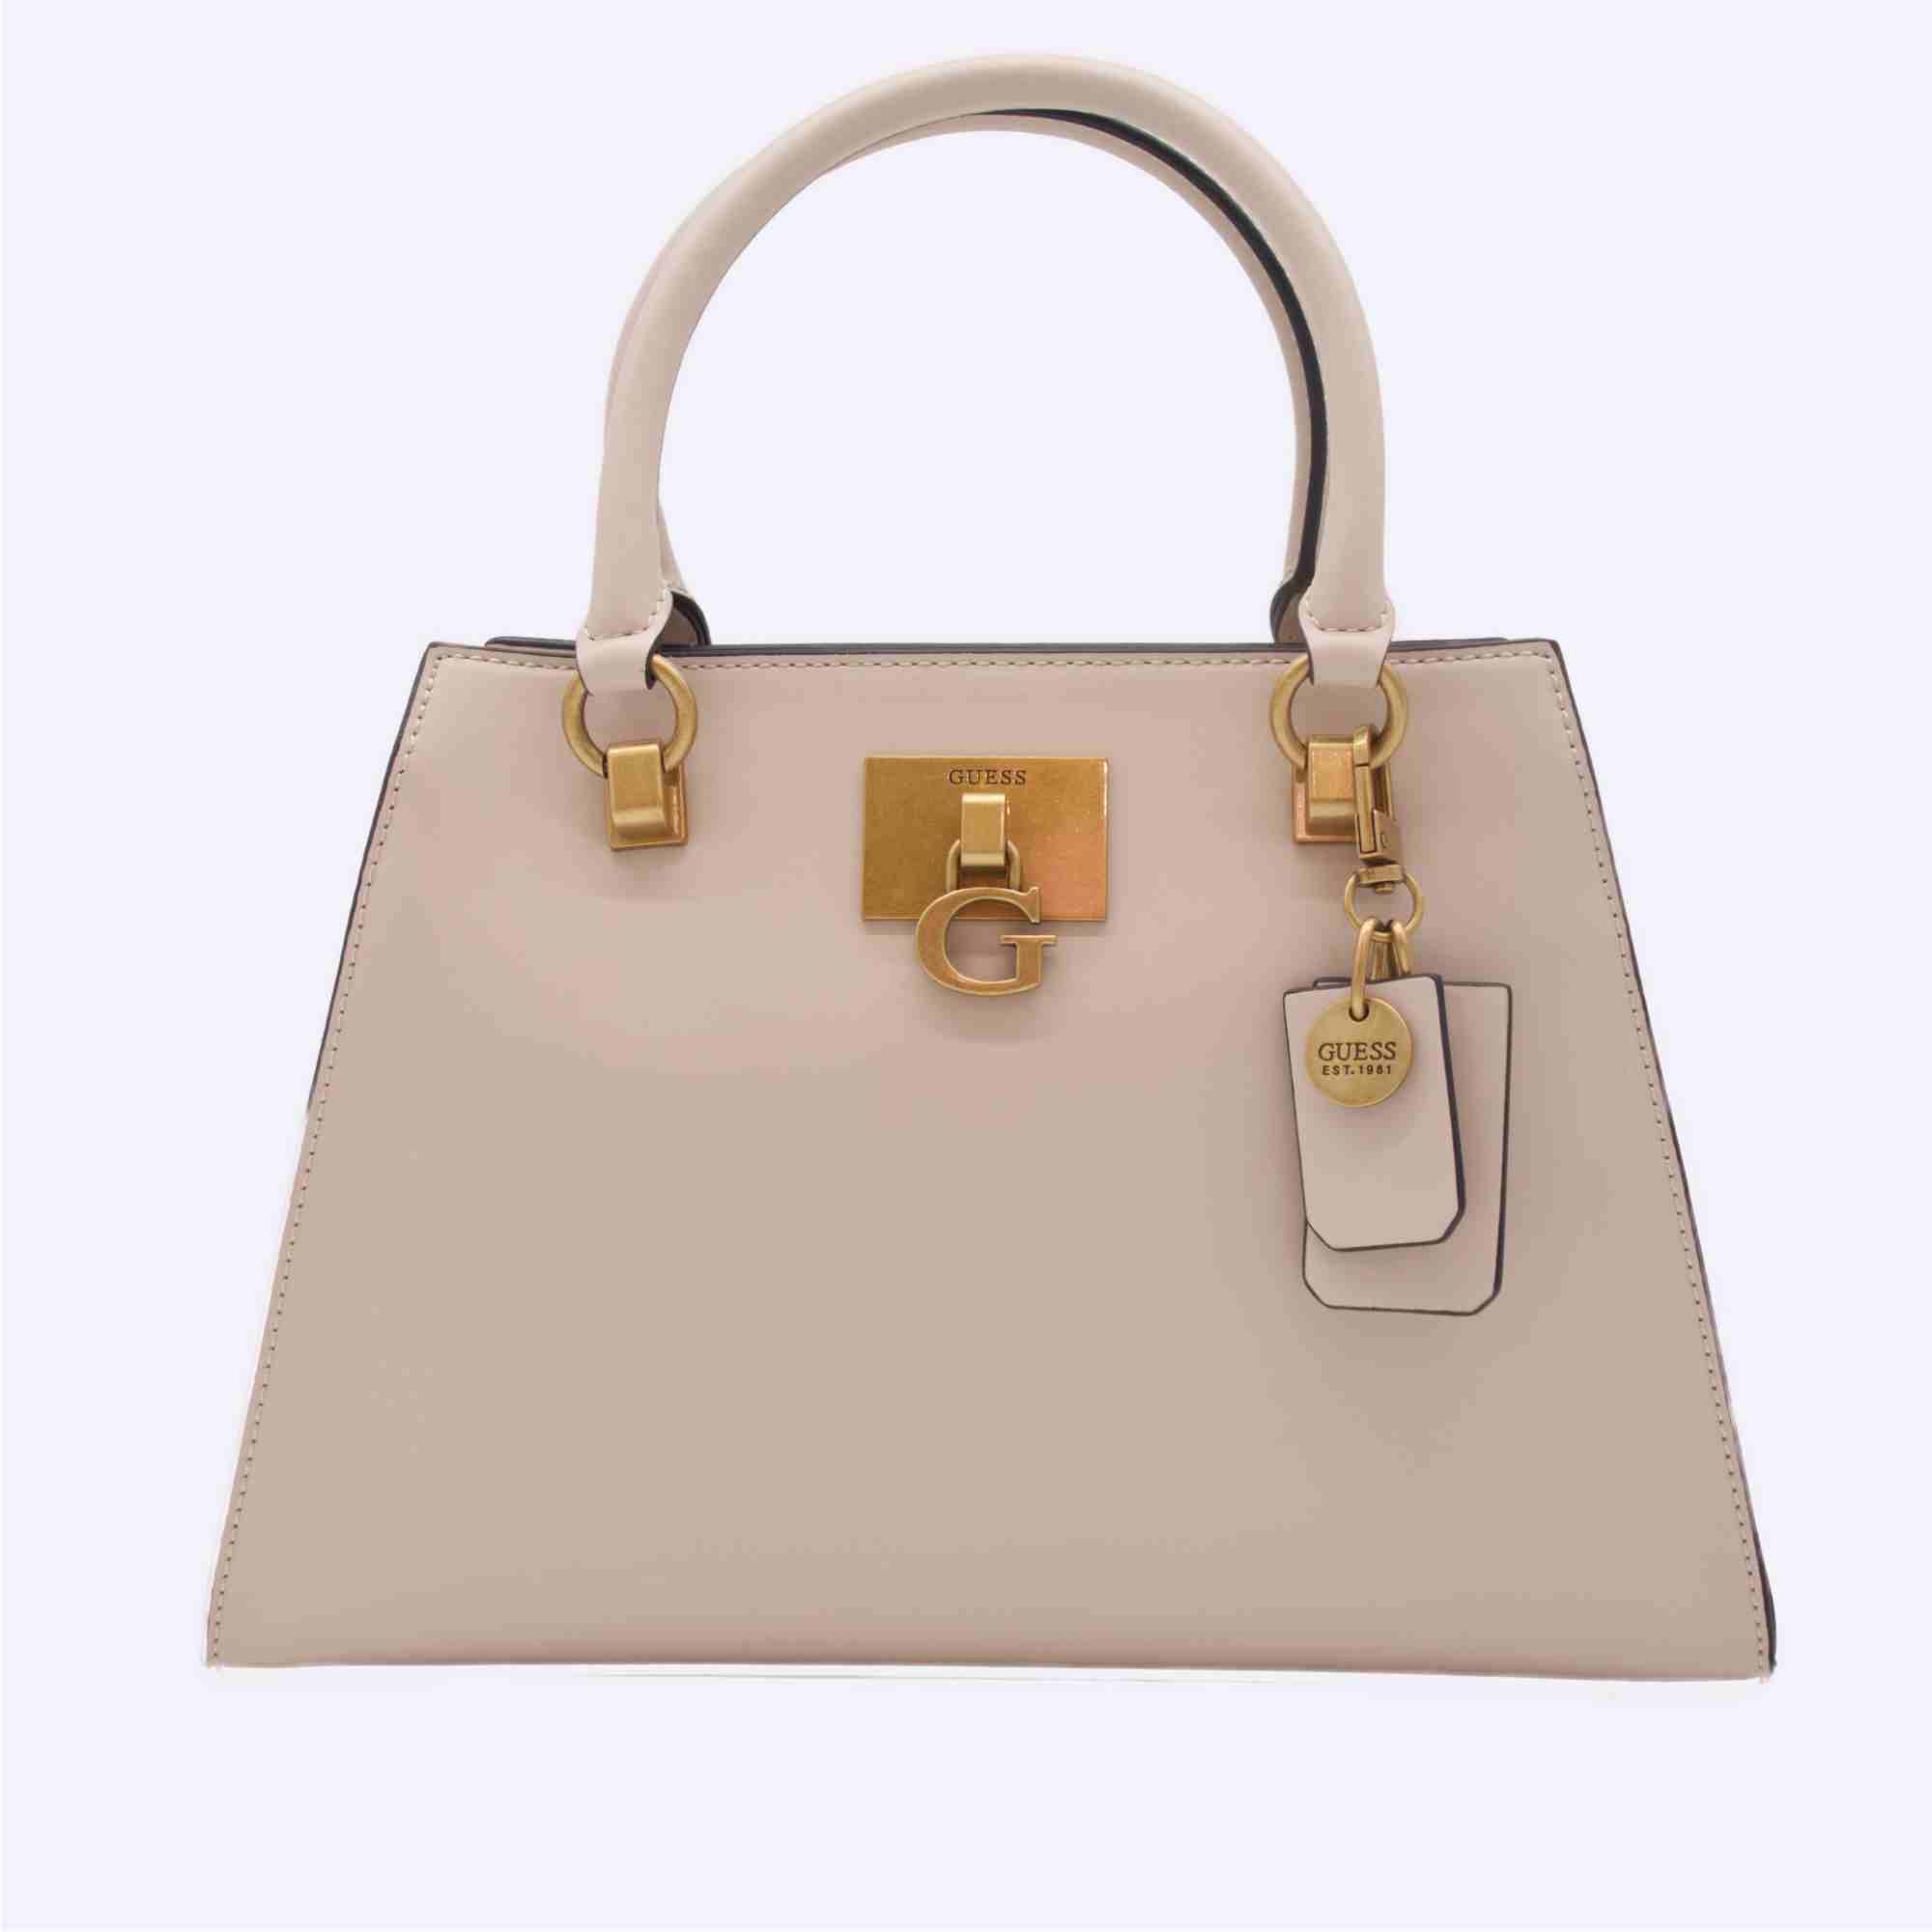 Guess bag beige with gold clasp